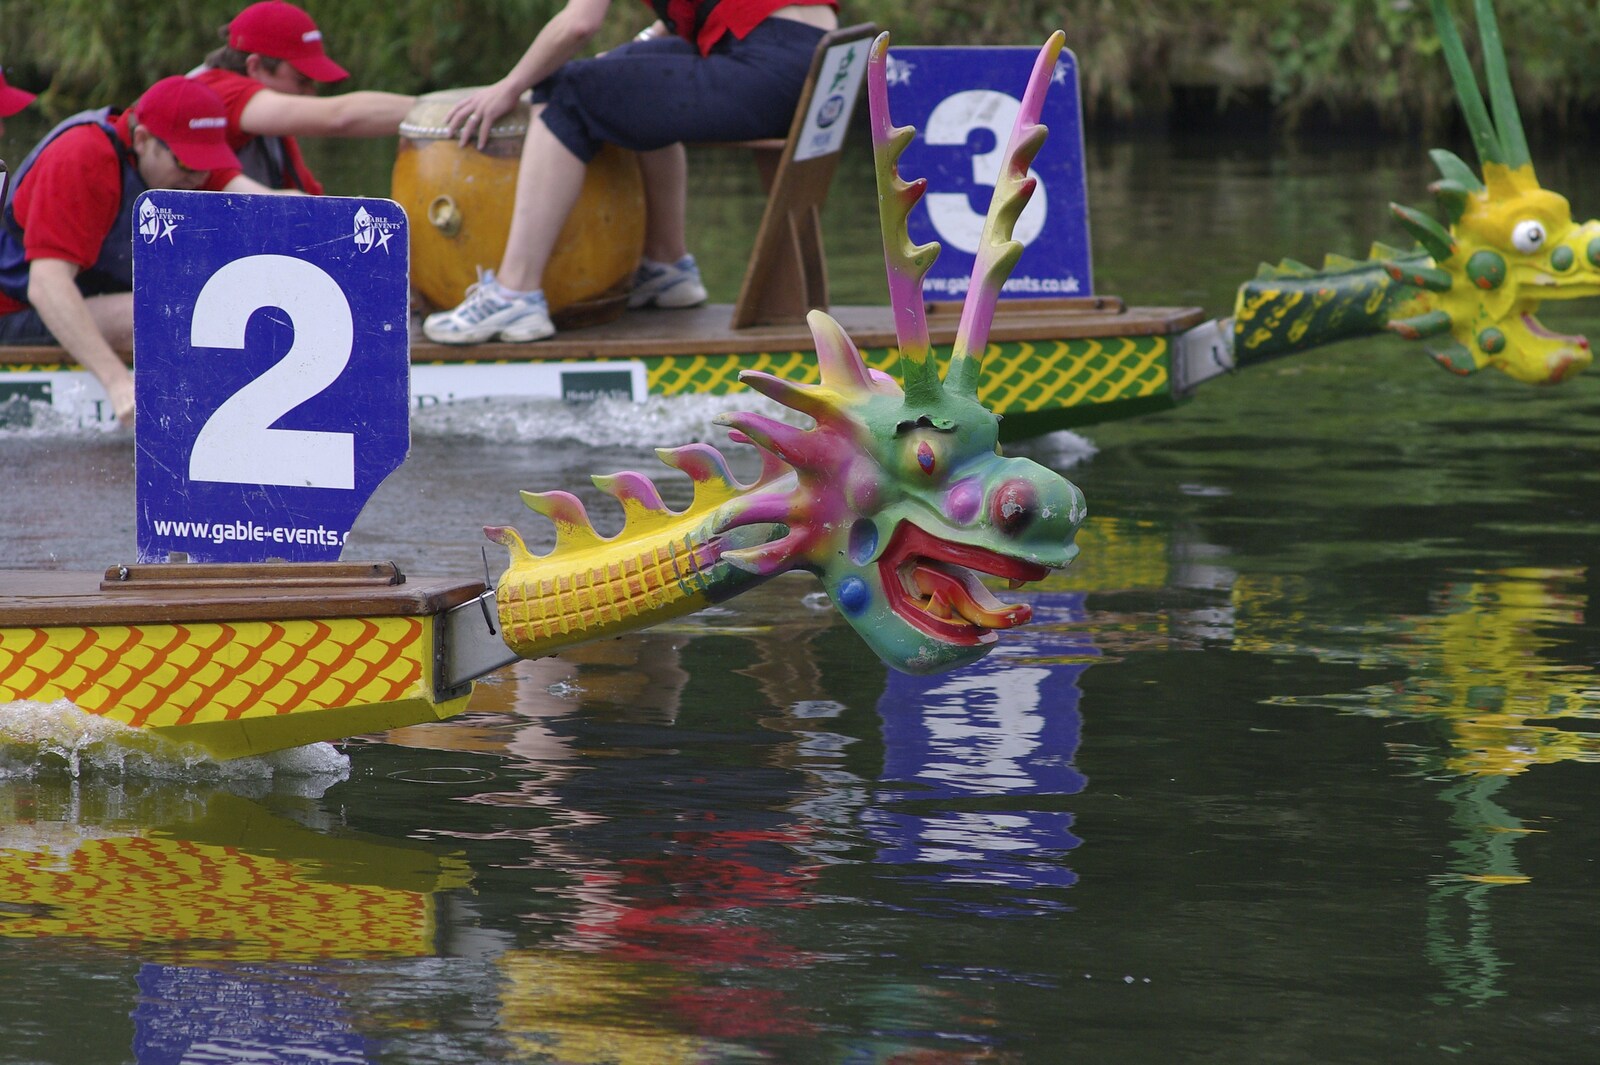 Qualcomm's Dragon-Boat Racing, Fen Ditton, Cambridge - 8th September 2007: Two dragons, neck-and-neck